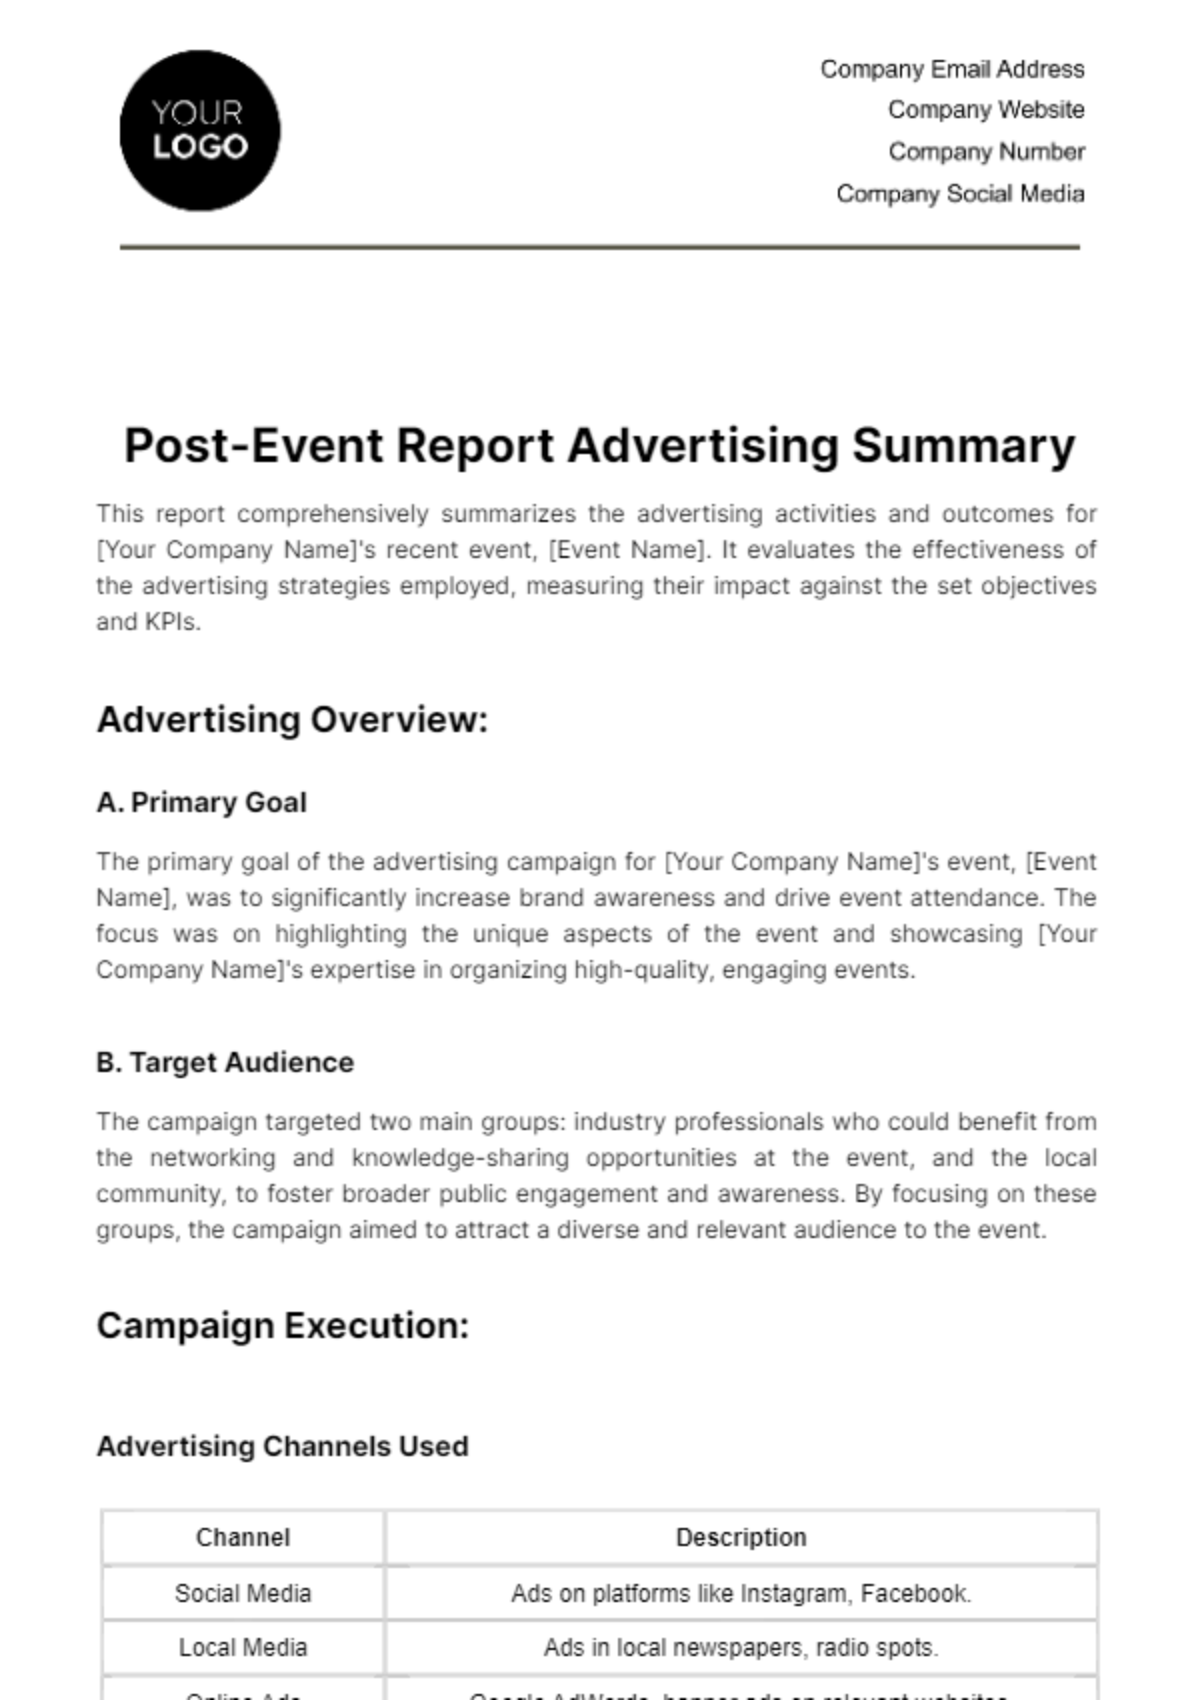 Post-Event Report Advertising Summary Template